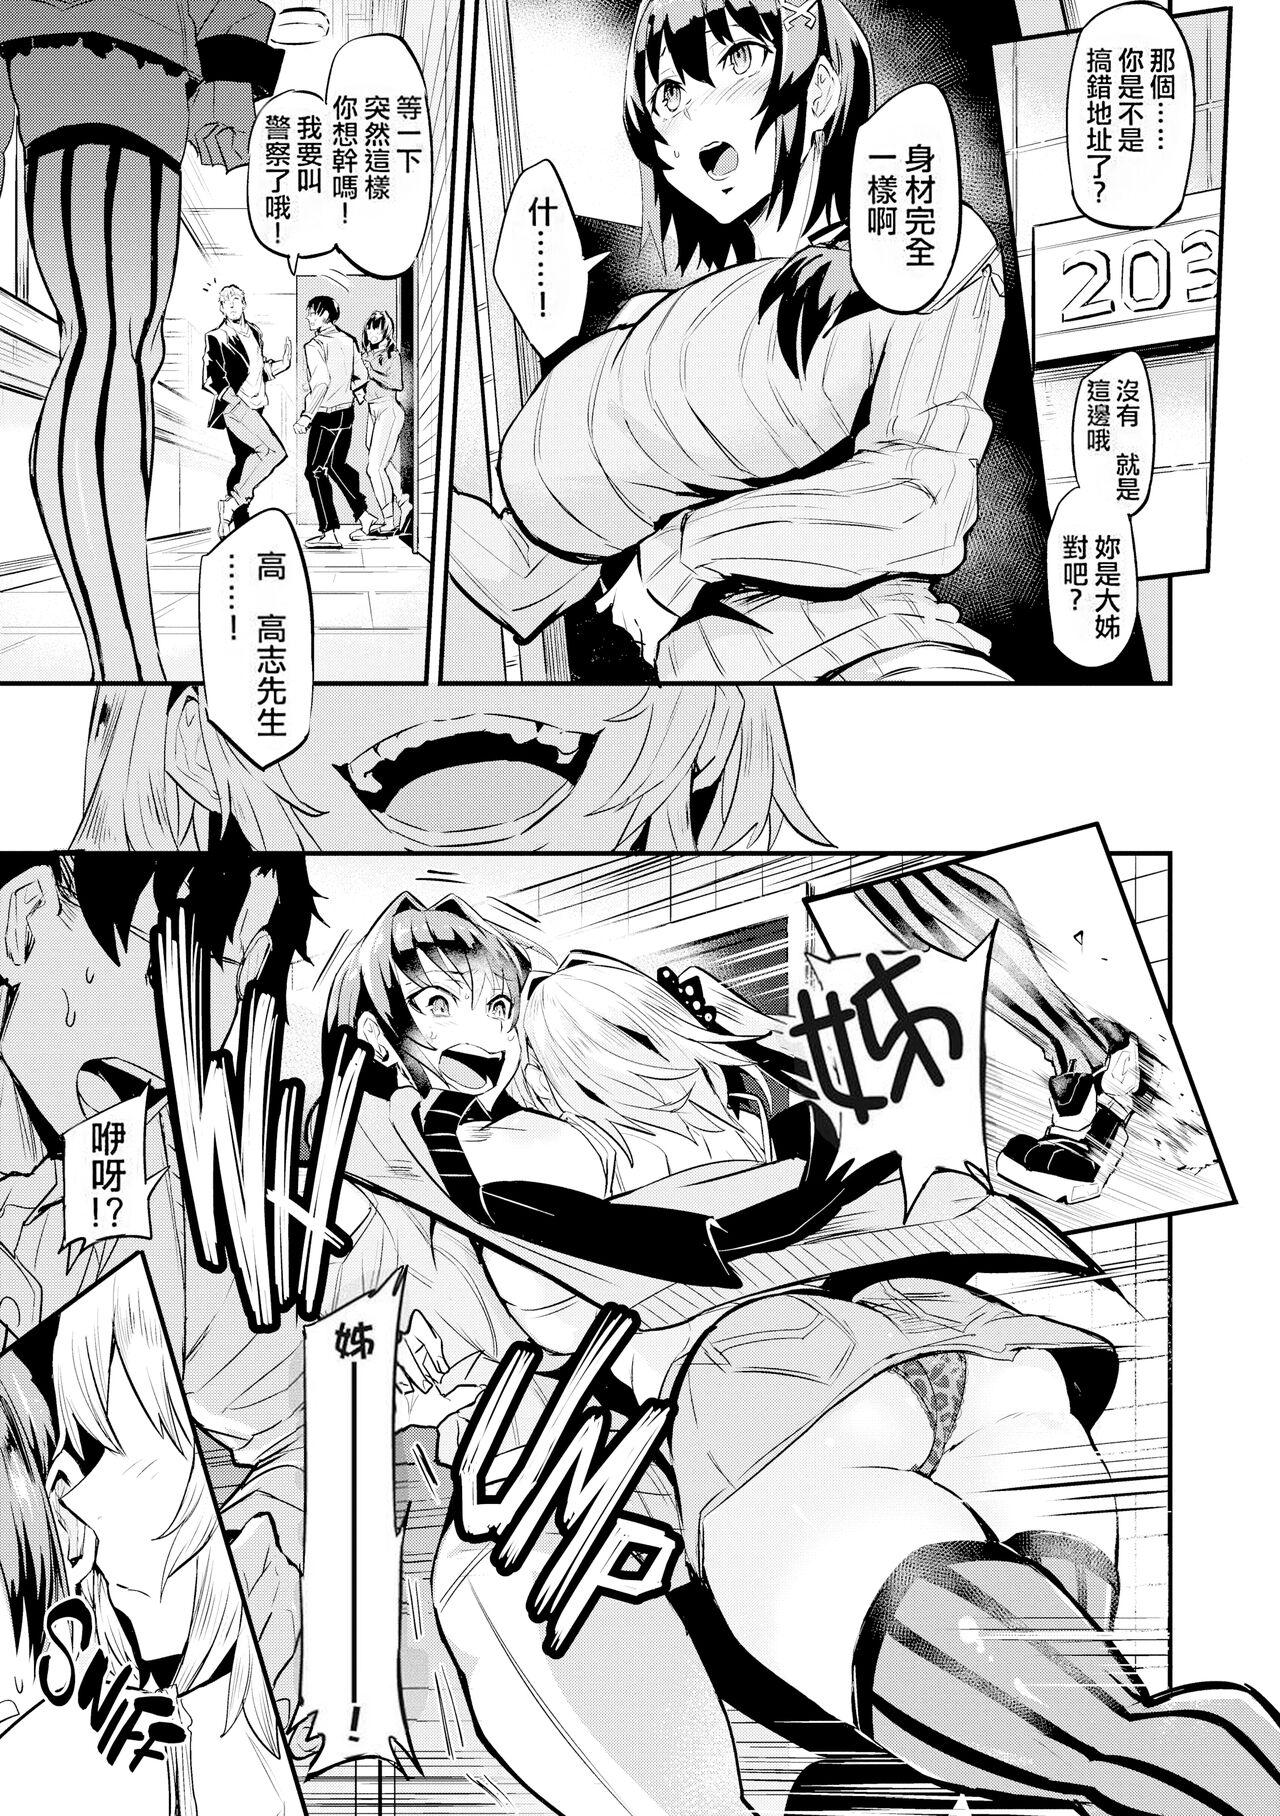 Enema Hitorijime - First Come First Served HD - Page 8